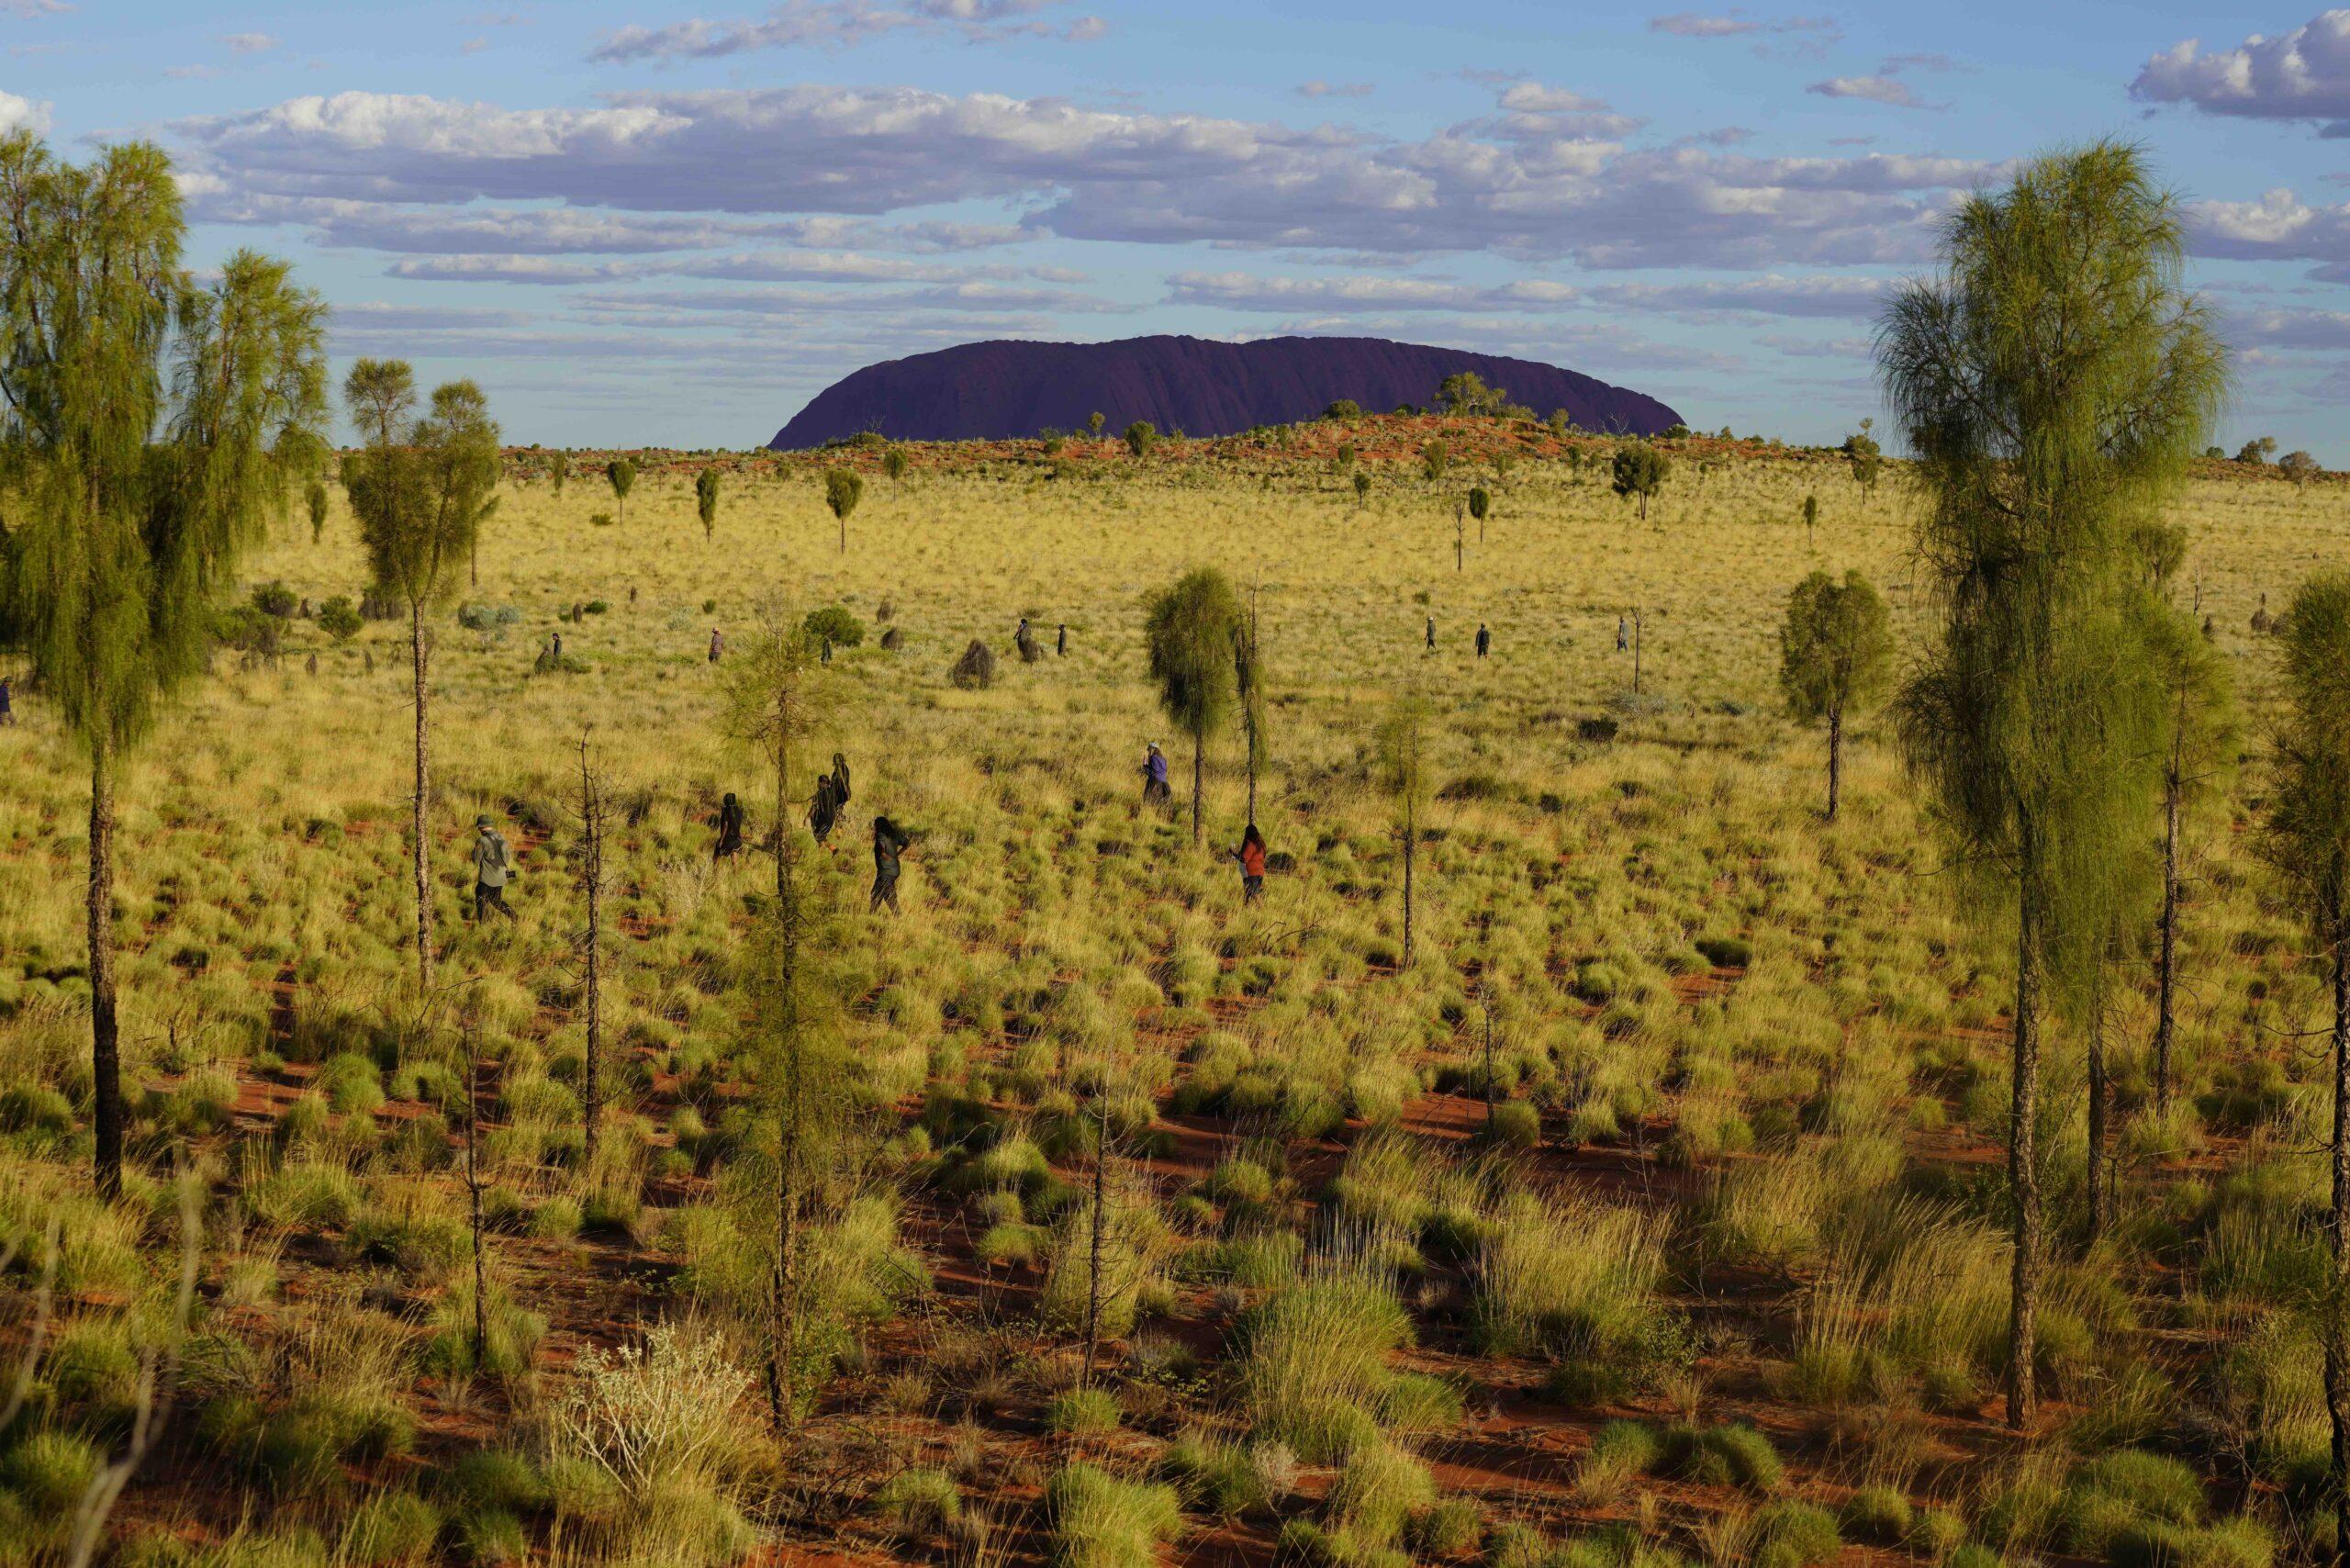 Uluru in the background, researchers in the foreground, searching for skinks.